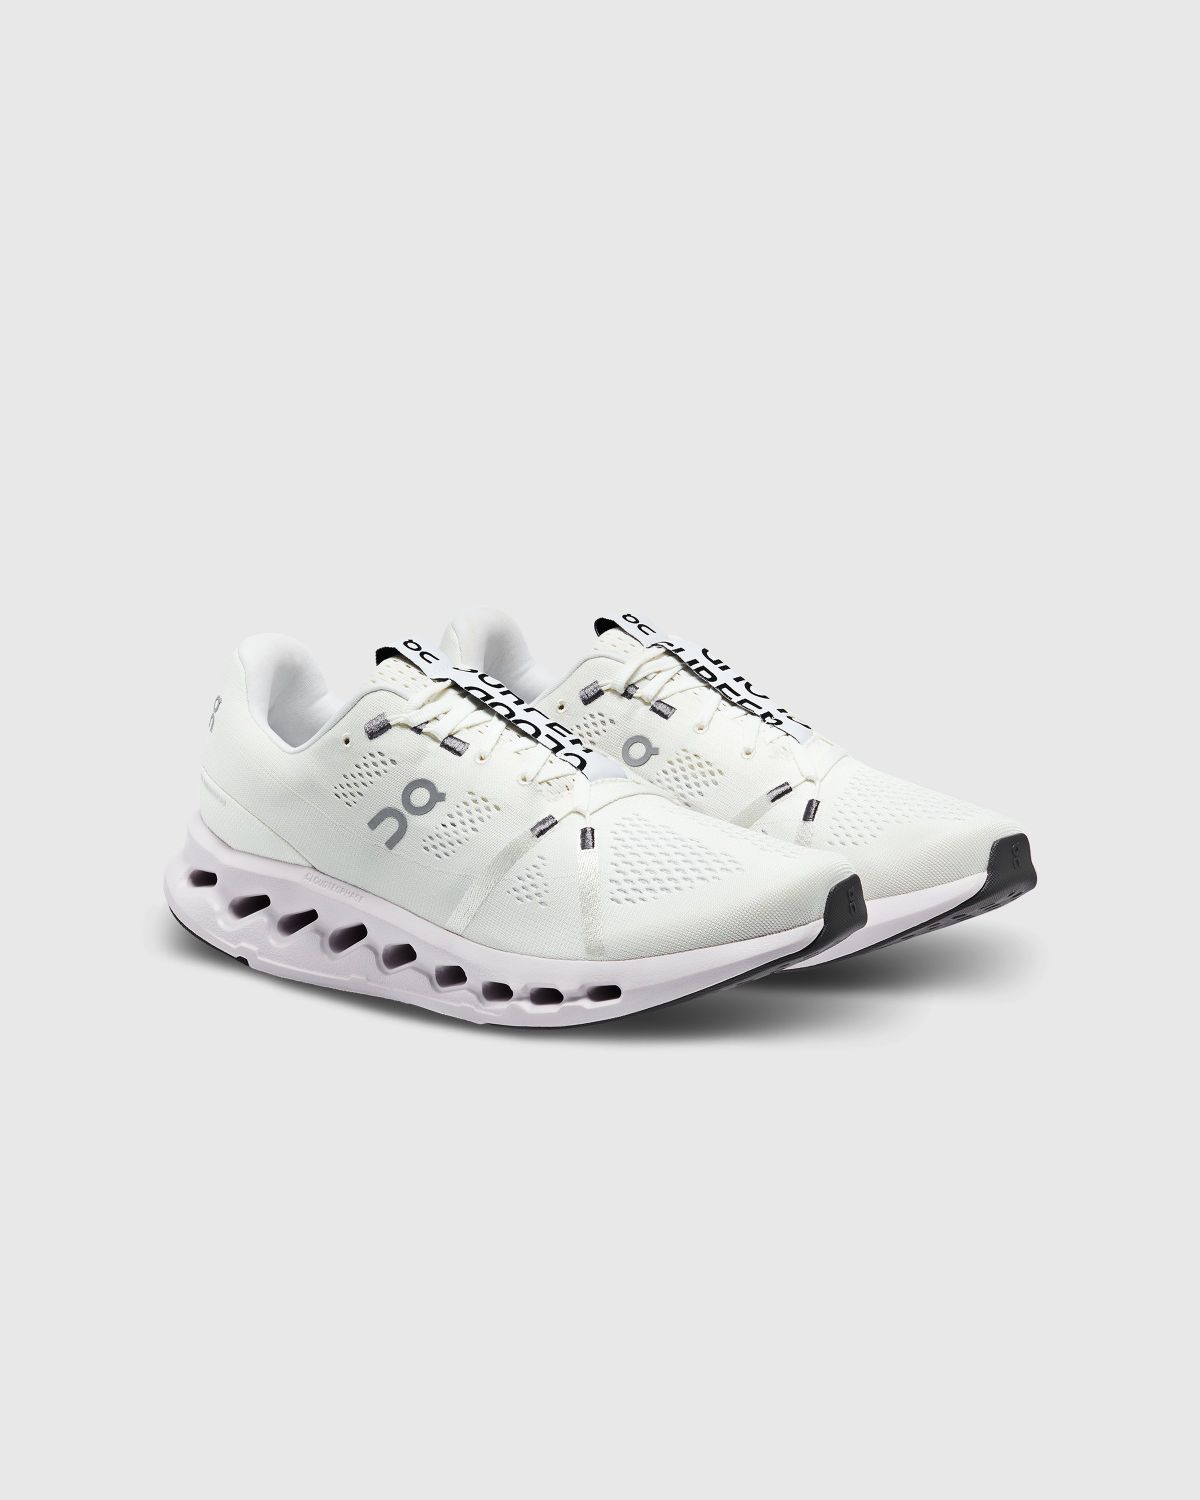 On – Cloudsurfer White/Frost - Sneakers - White - Image 3